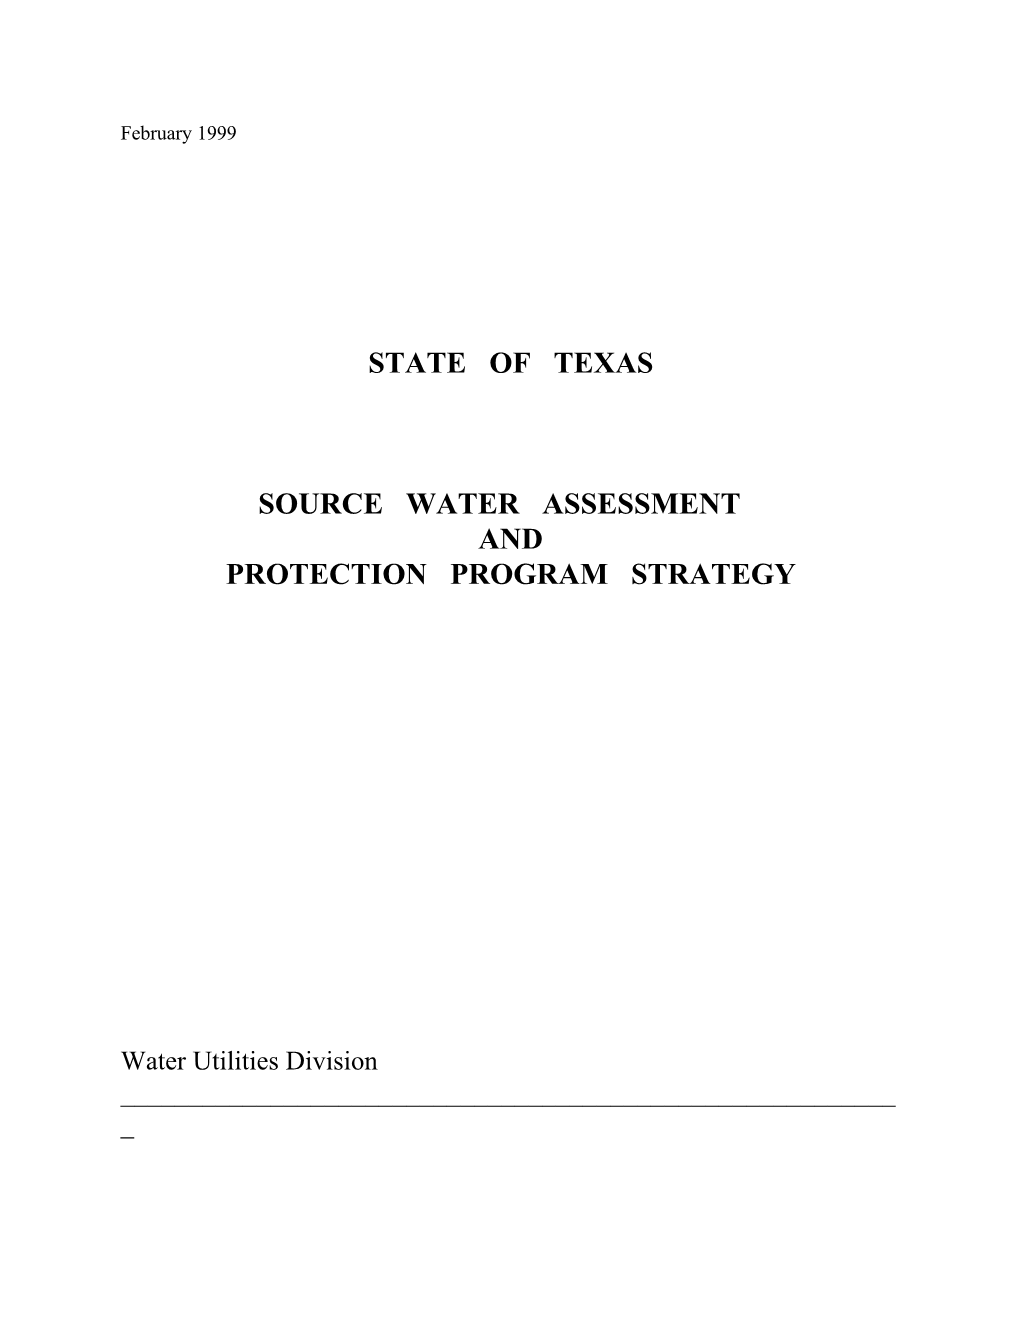 State of Texas Source Water Assessment and Protection Program